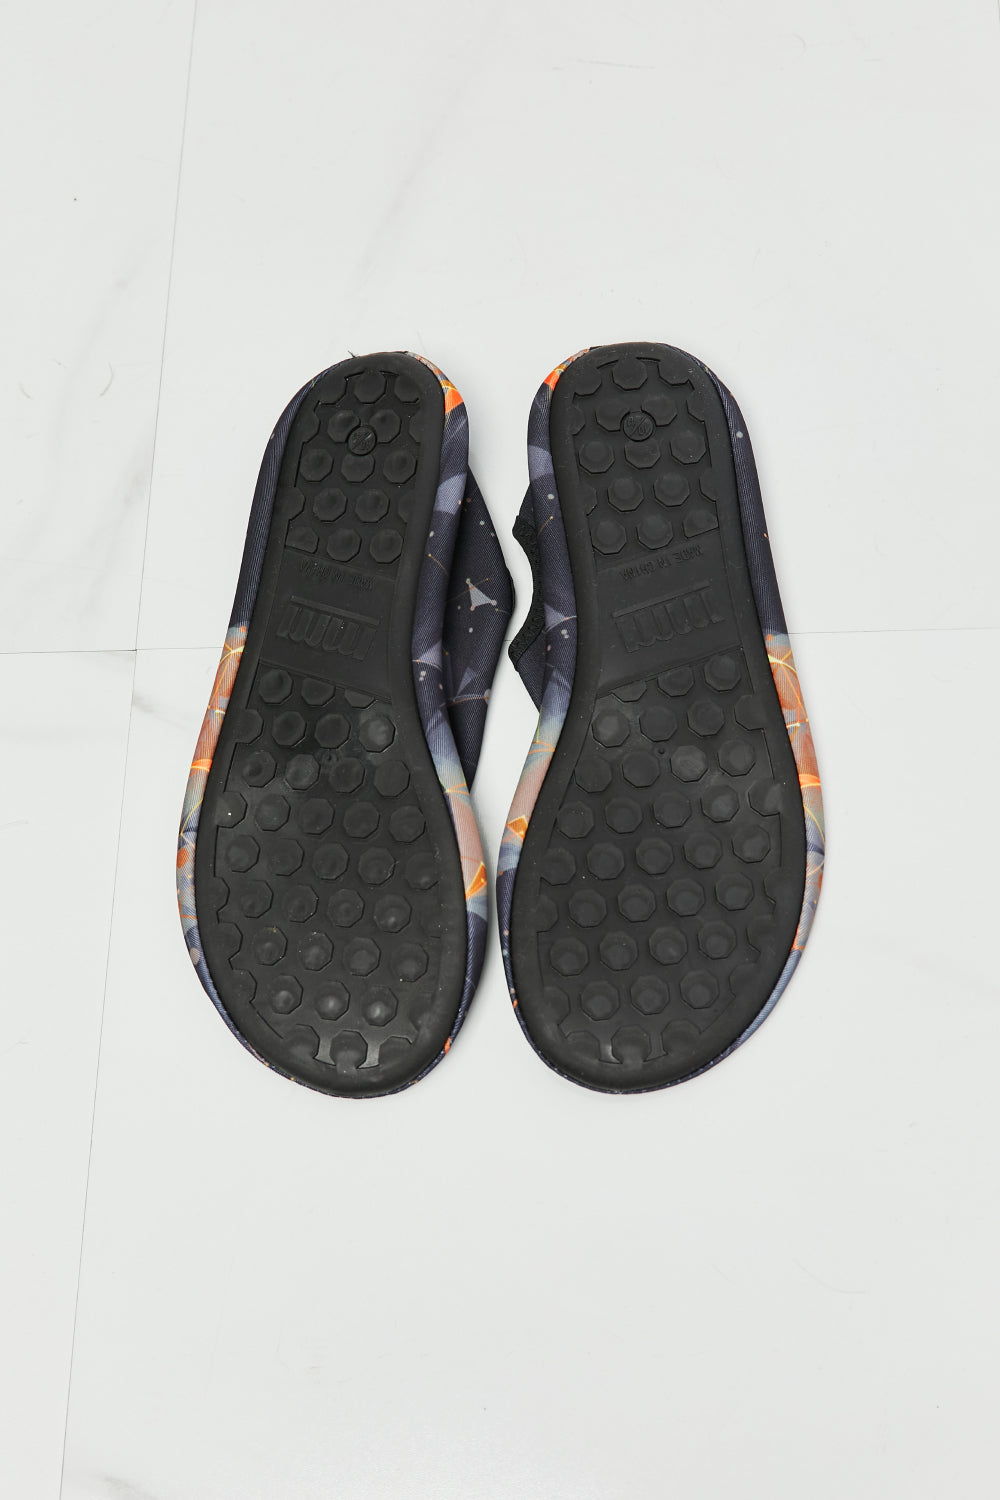 MMshoes On The Shore Water Shoes in Black/Orange  Sunset and Swim   